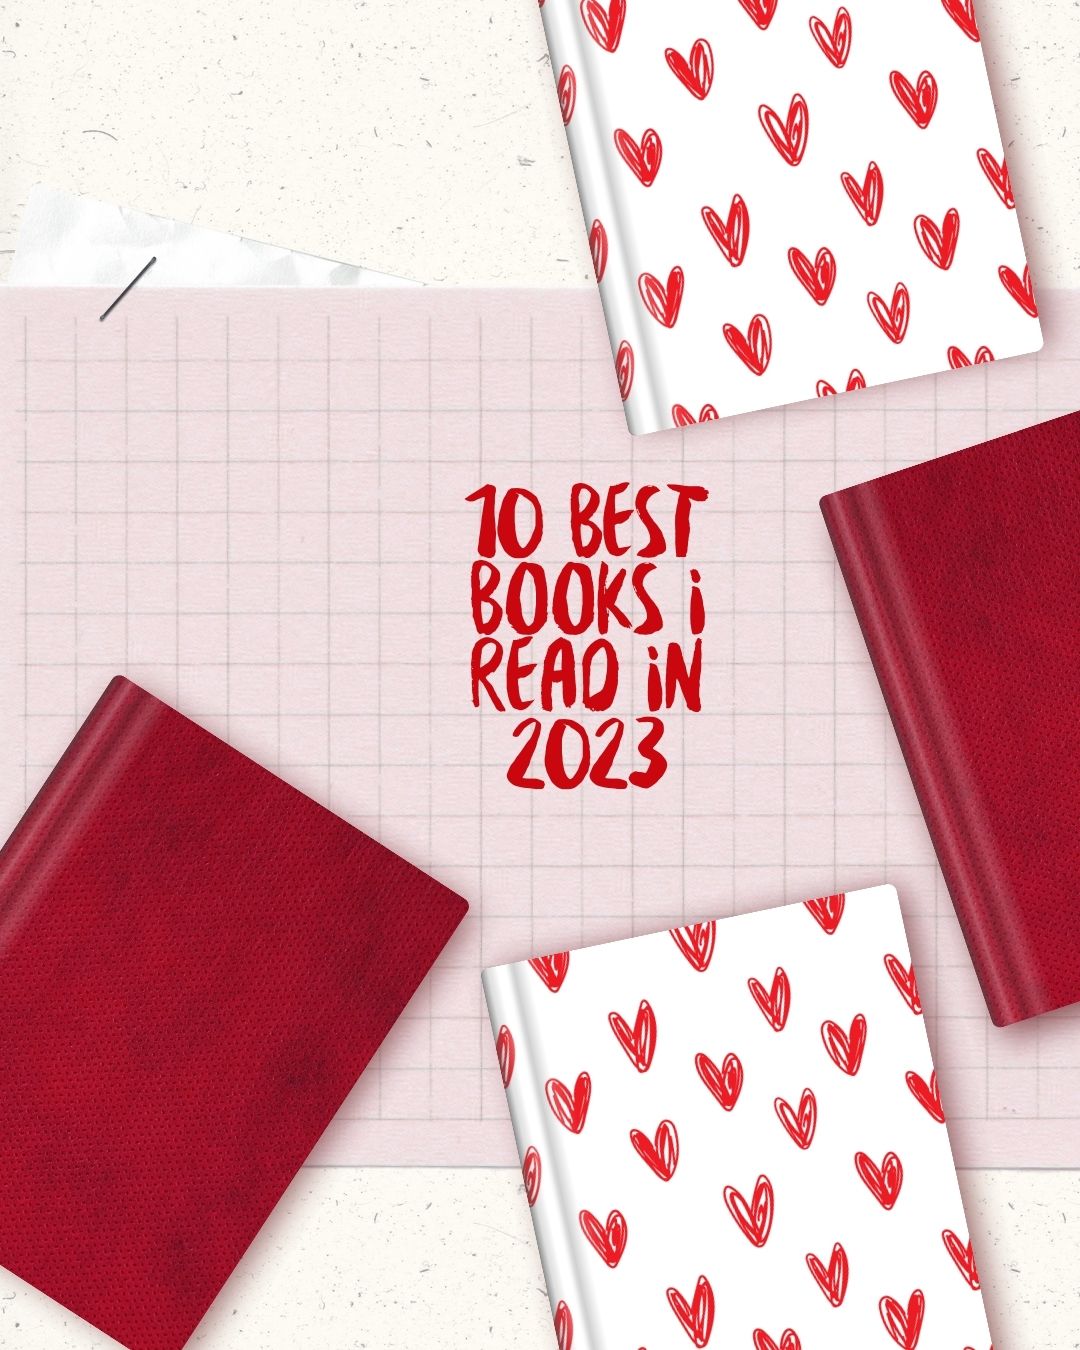 10 Best Books I Read In 2023 feature image. The text sits in the centre surrounded by red and white book covers. The red ones are plain and the white ones have red hearts on them